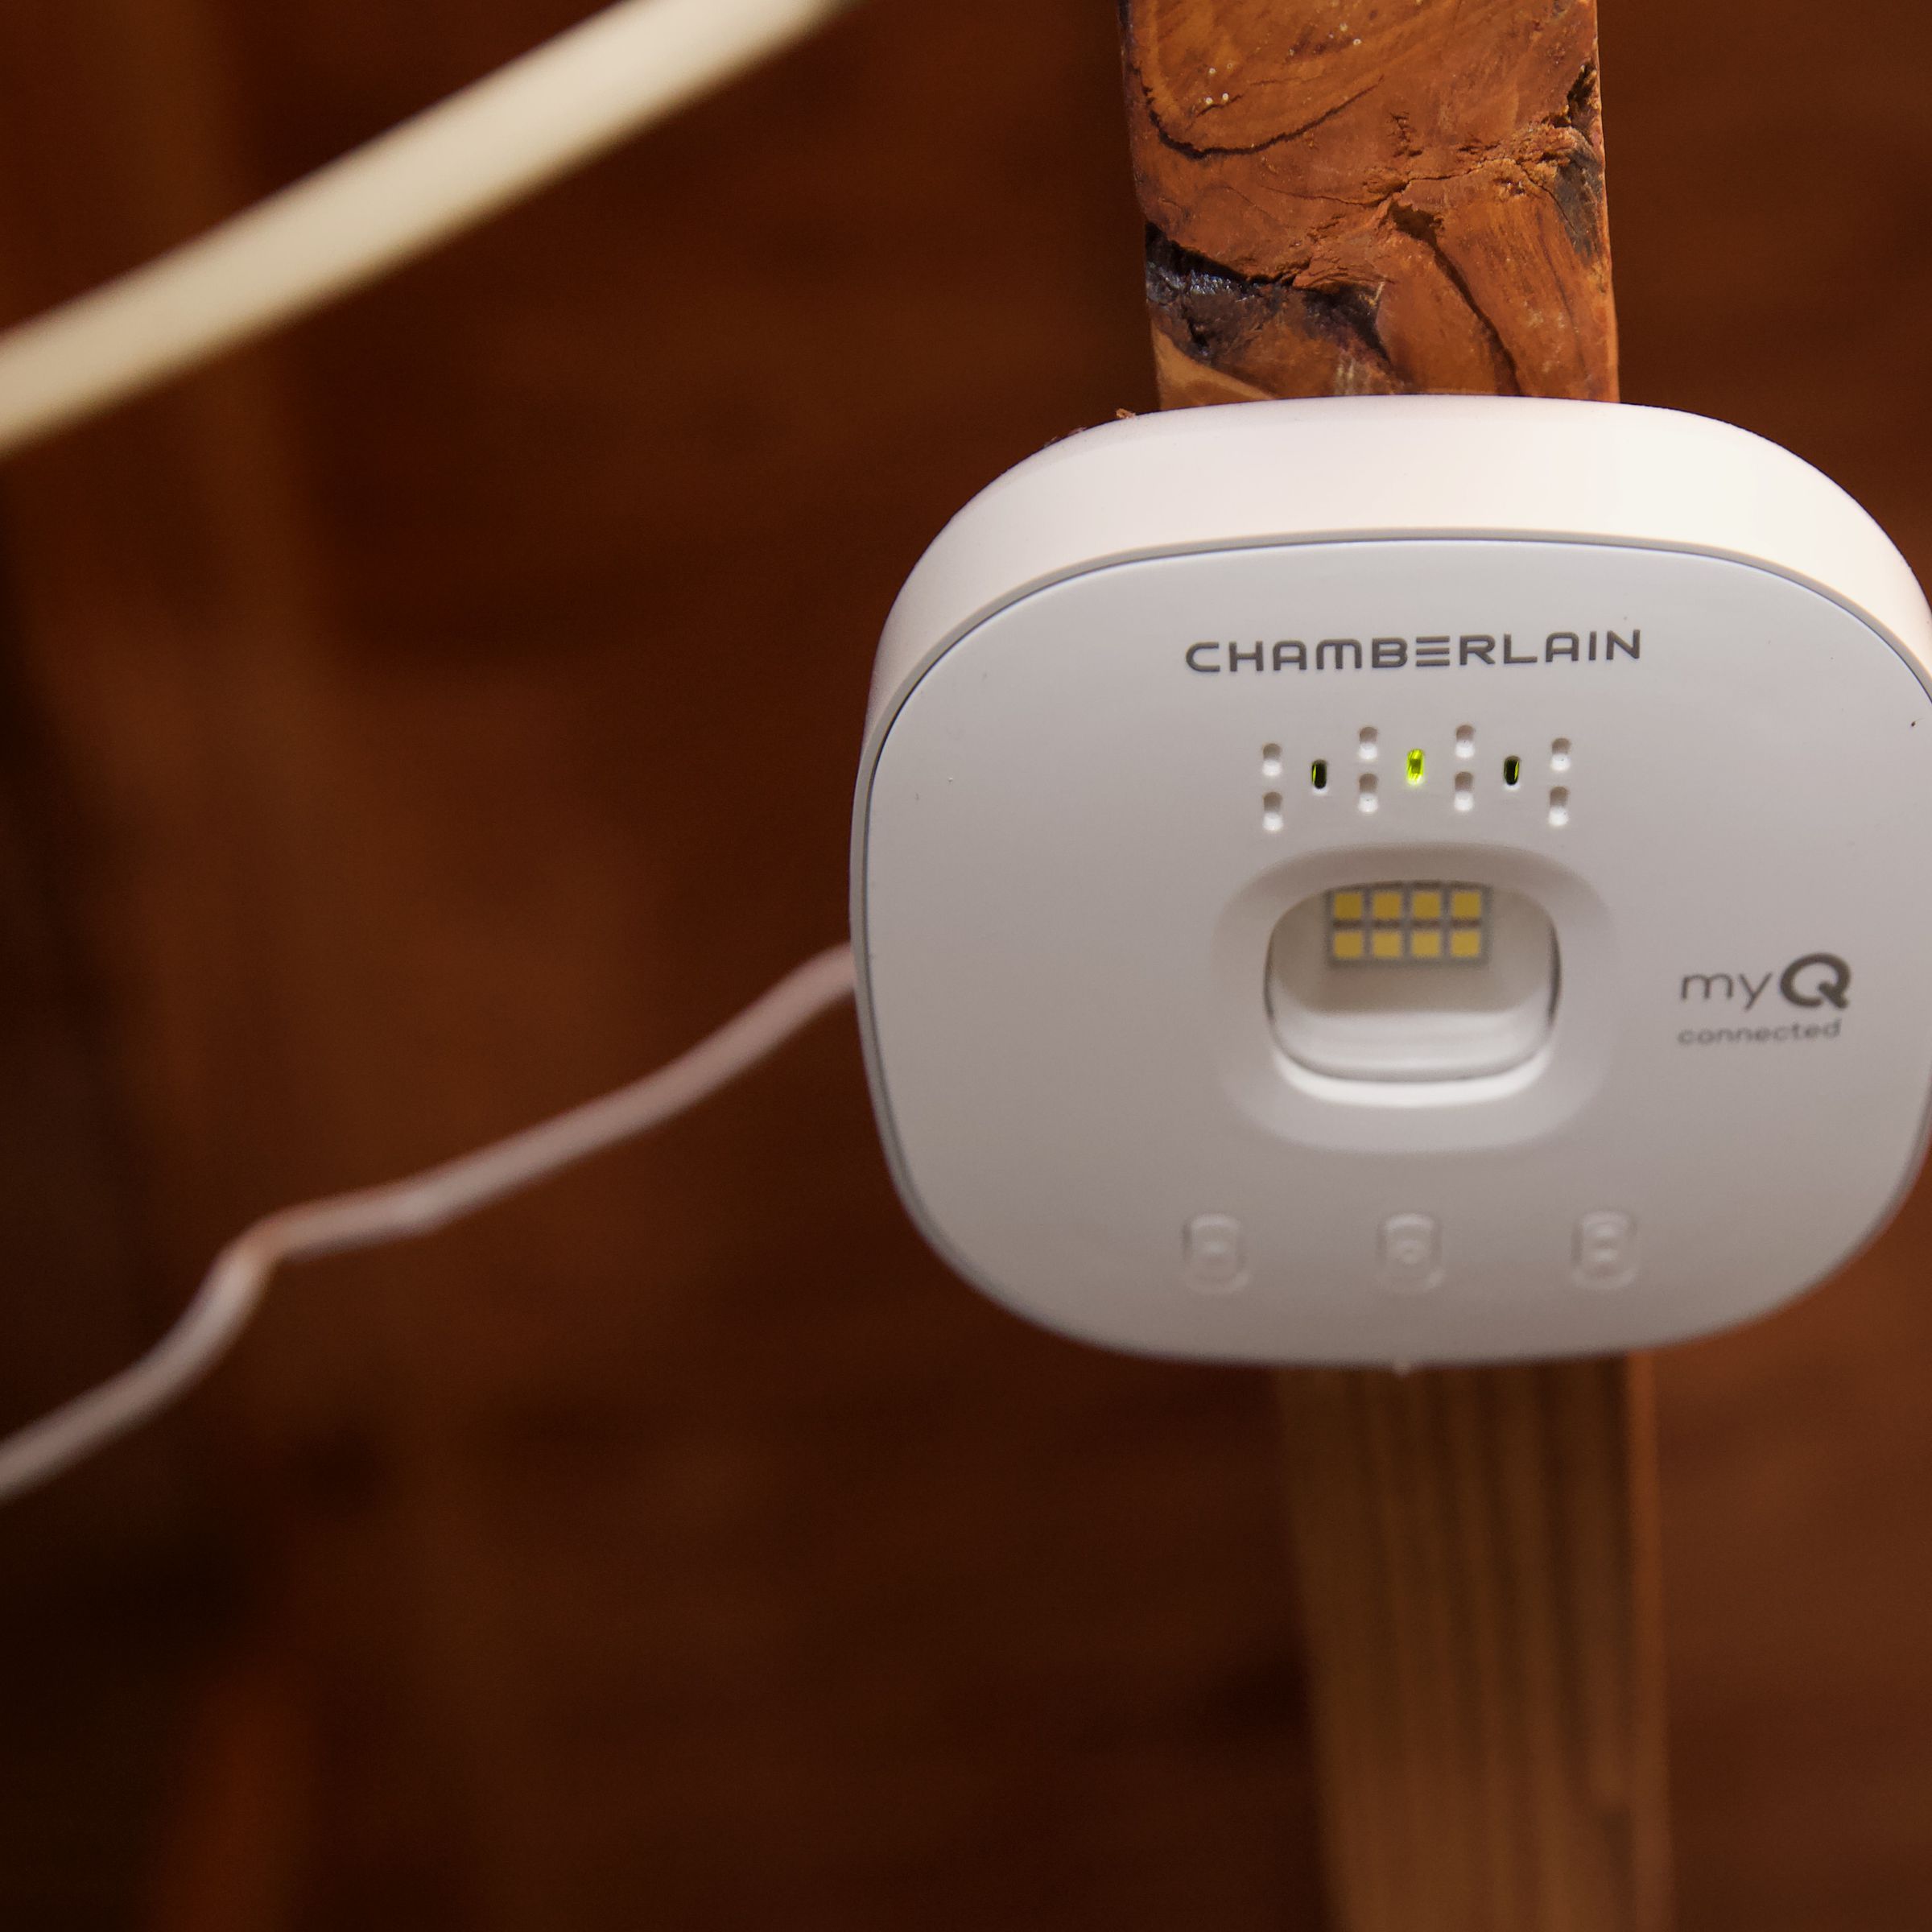 The Chamberlain MyQ smart garage door controller connects to a garage door opener so you can control it from anywhere.